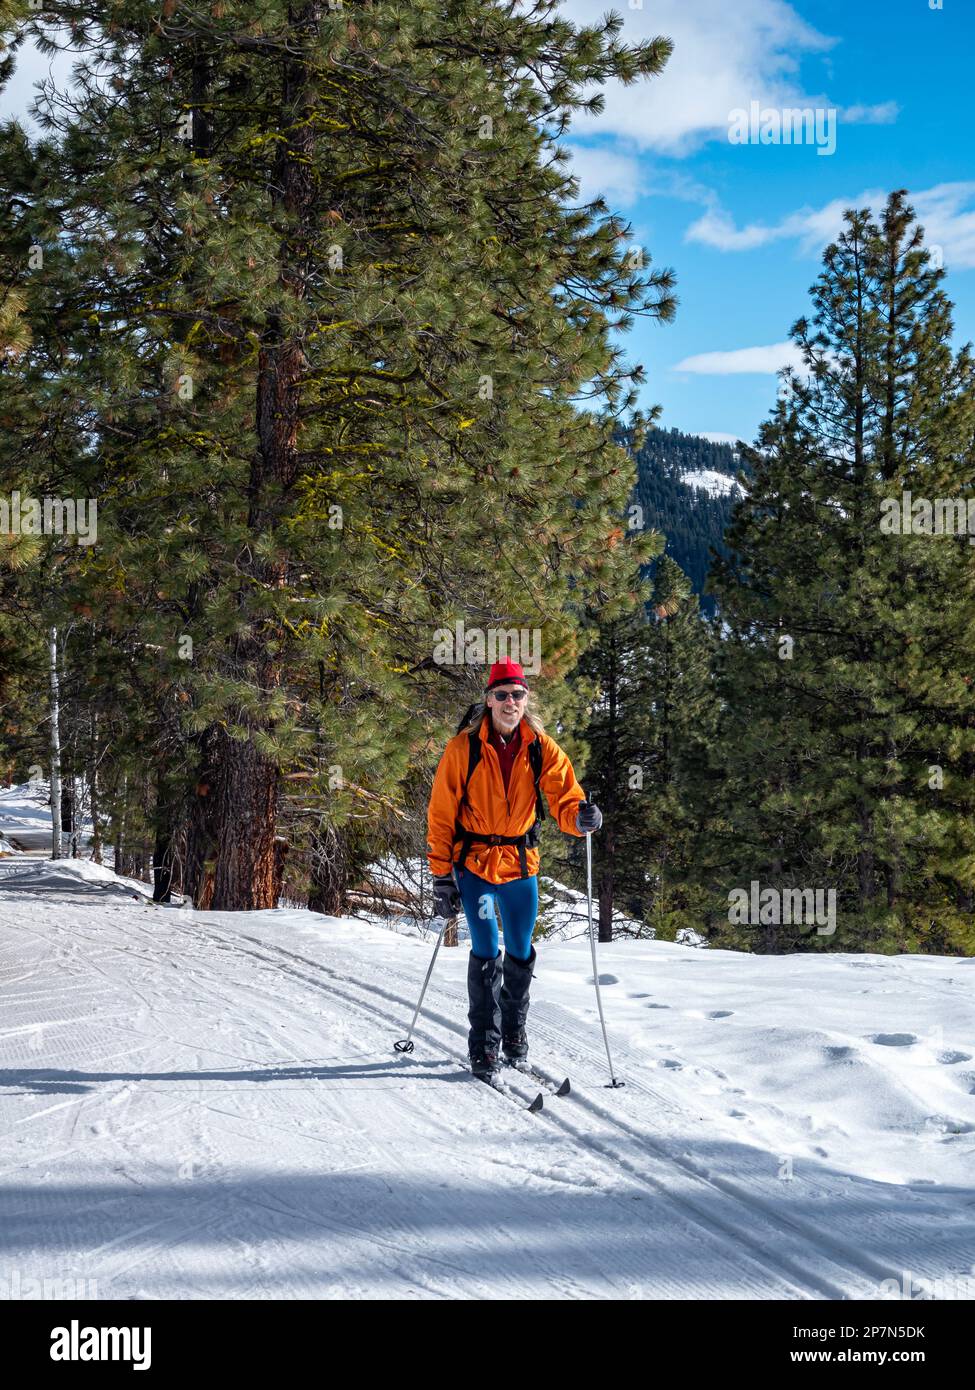 WA23241-00...WASHINGTON - Cross-country skier on the groomed Cassal Hut Trail in the Rendezvous area extensive Methow Valley trail system. Stock Photo